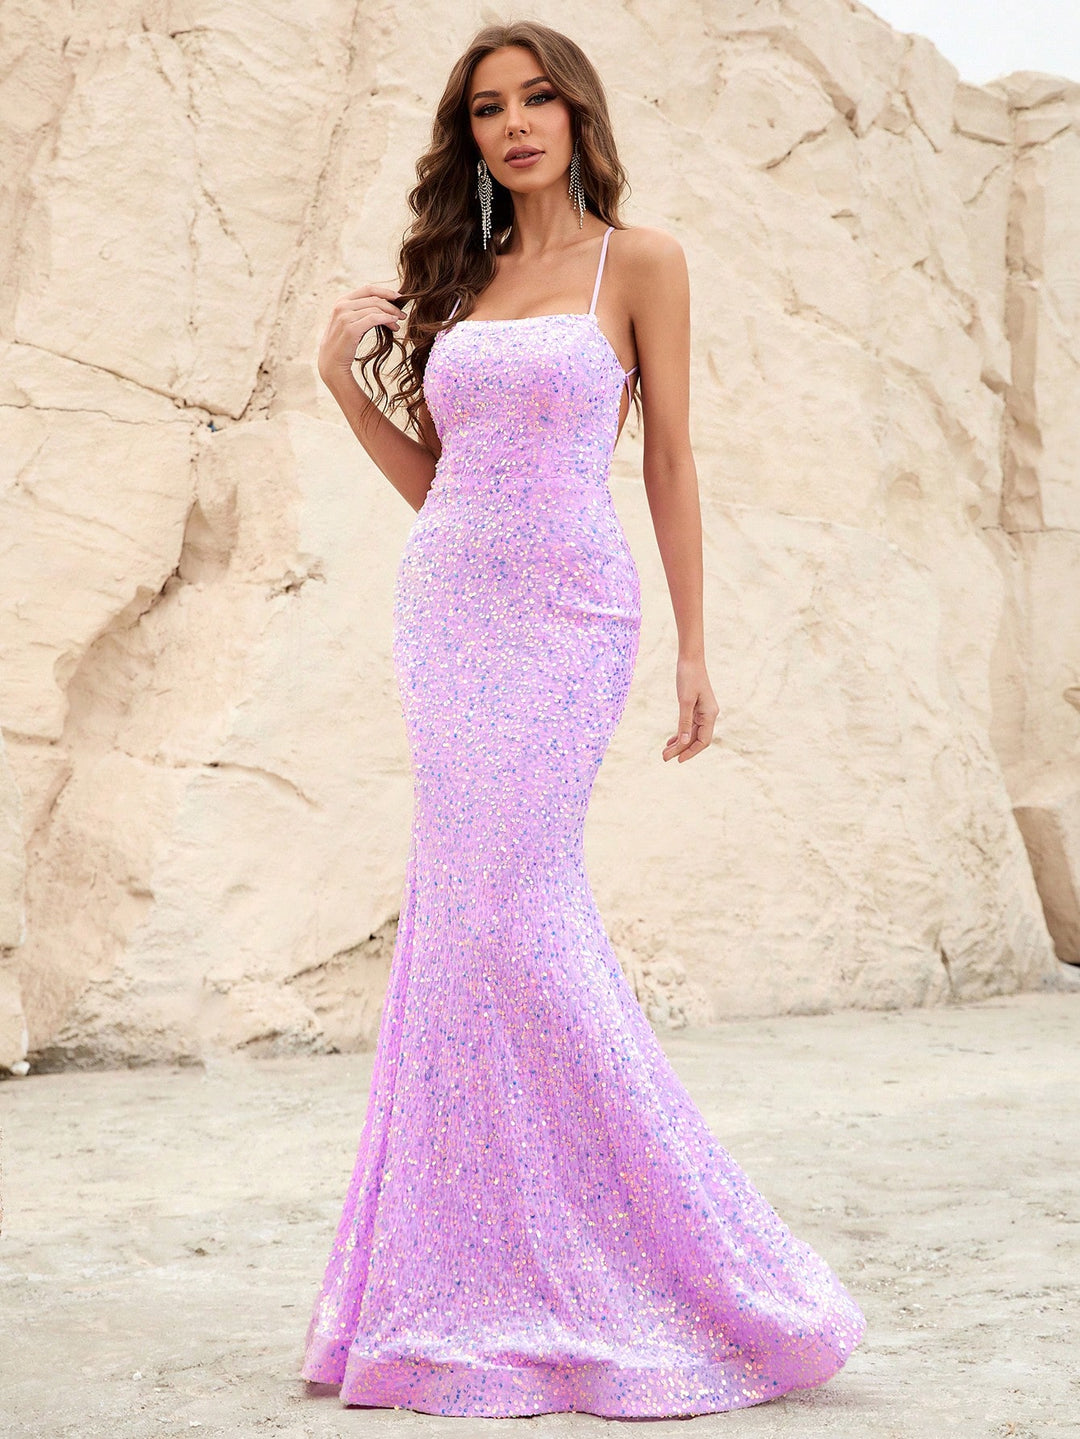 Spaghetti Strap Lace Up Back Sequin Mermaid Dress